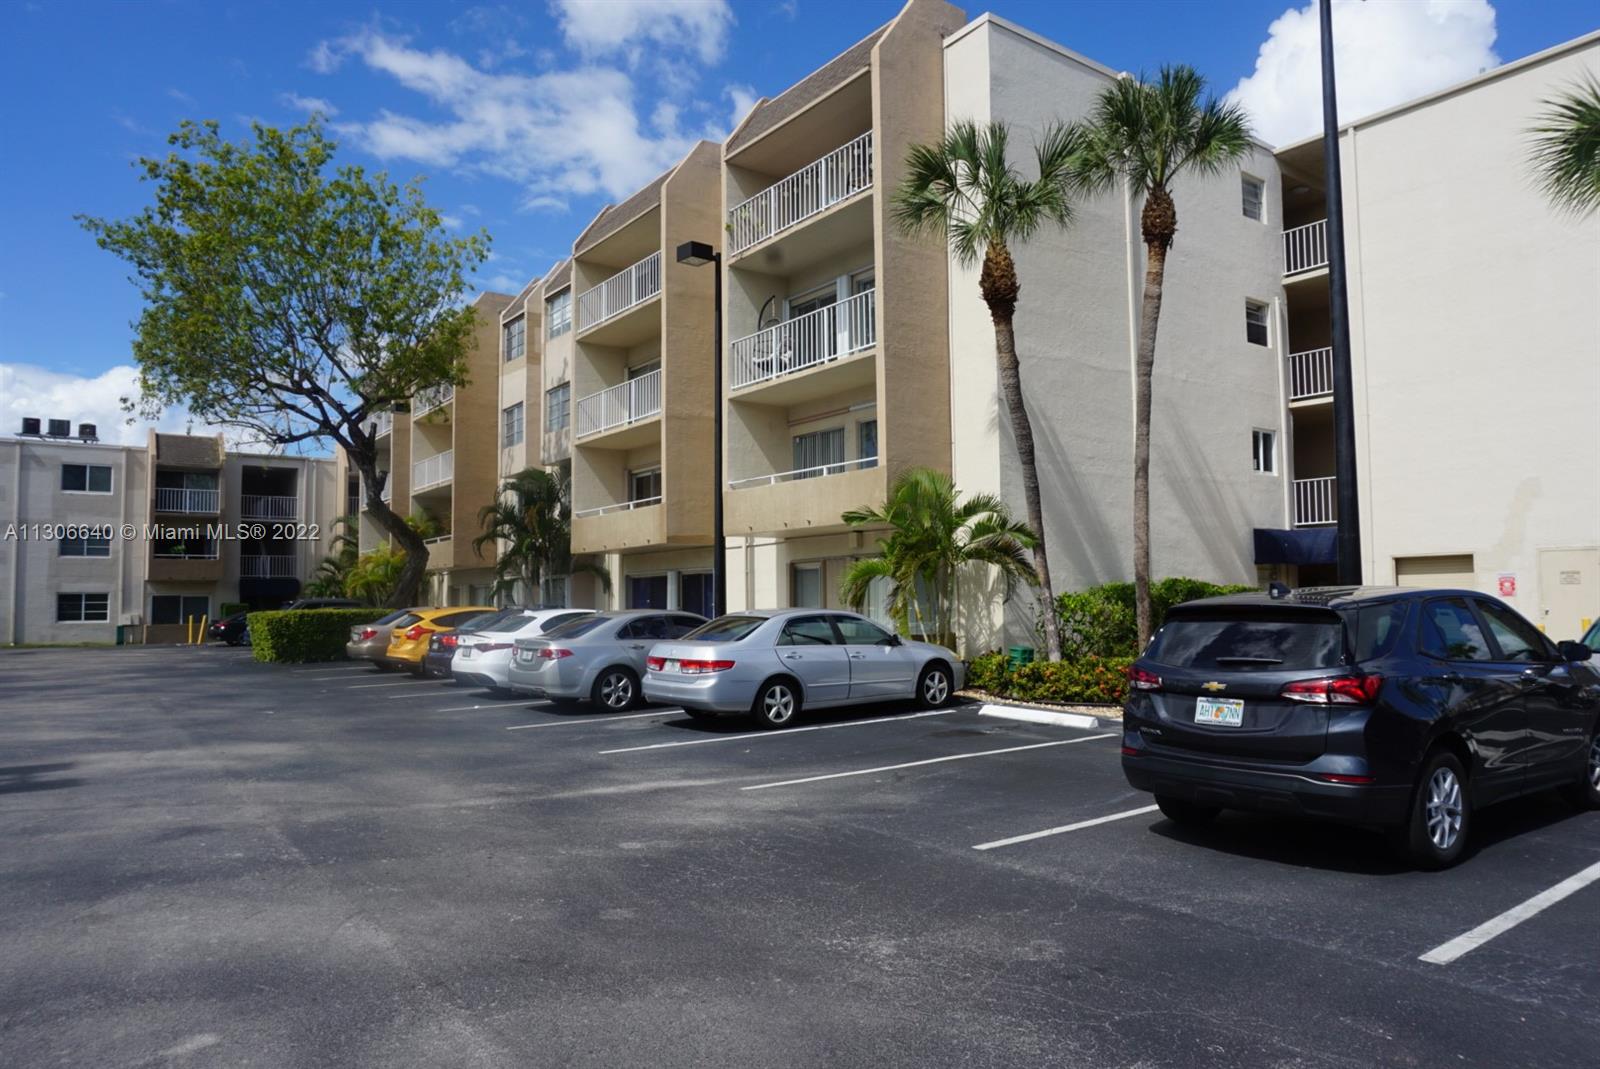 Great location in the Dadeland area with ease of access to major thoroughfare and close proximity to nightlife and shopping. Partial renovation with wood floors thru out and partial renovation on bathrooms and kitchen. This is part of a probate action and offers are subject t court approval.